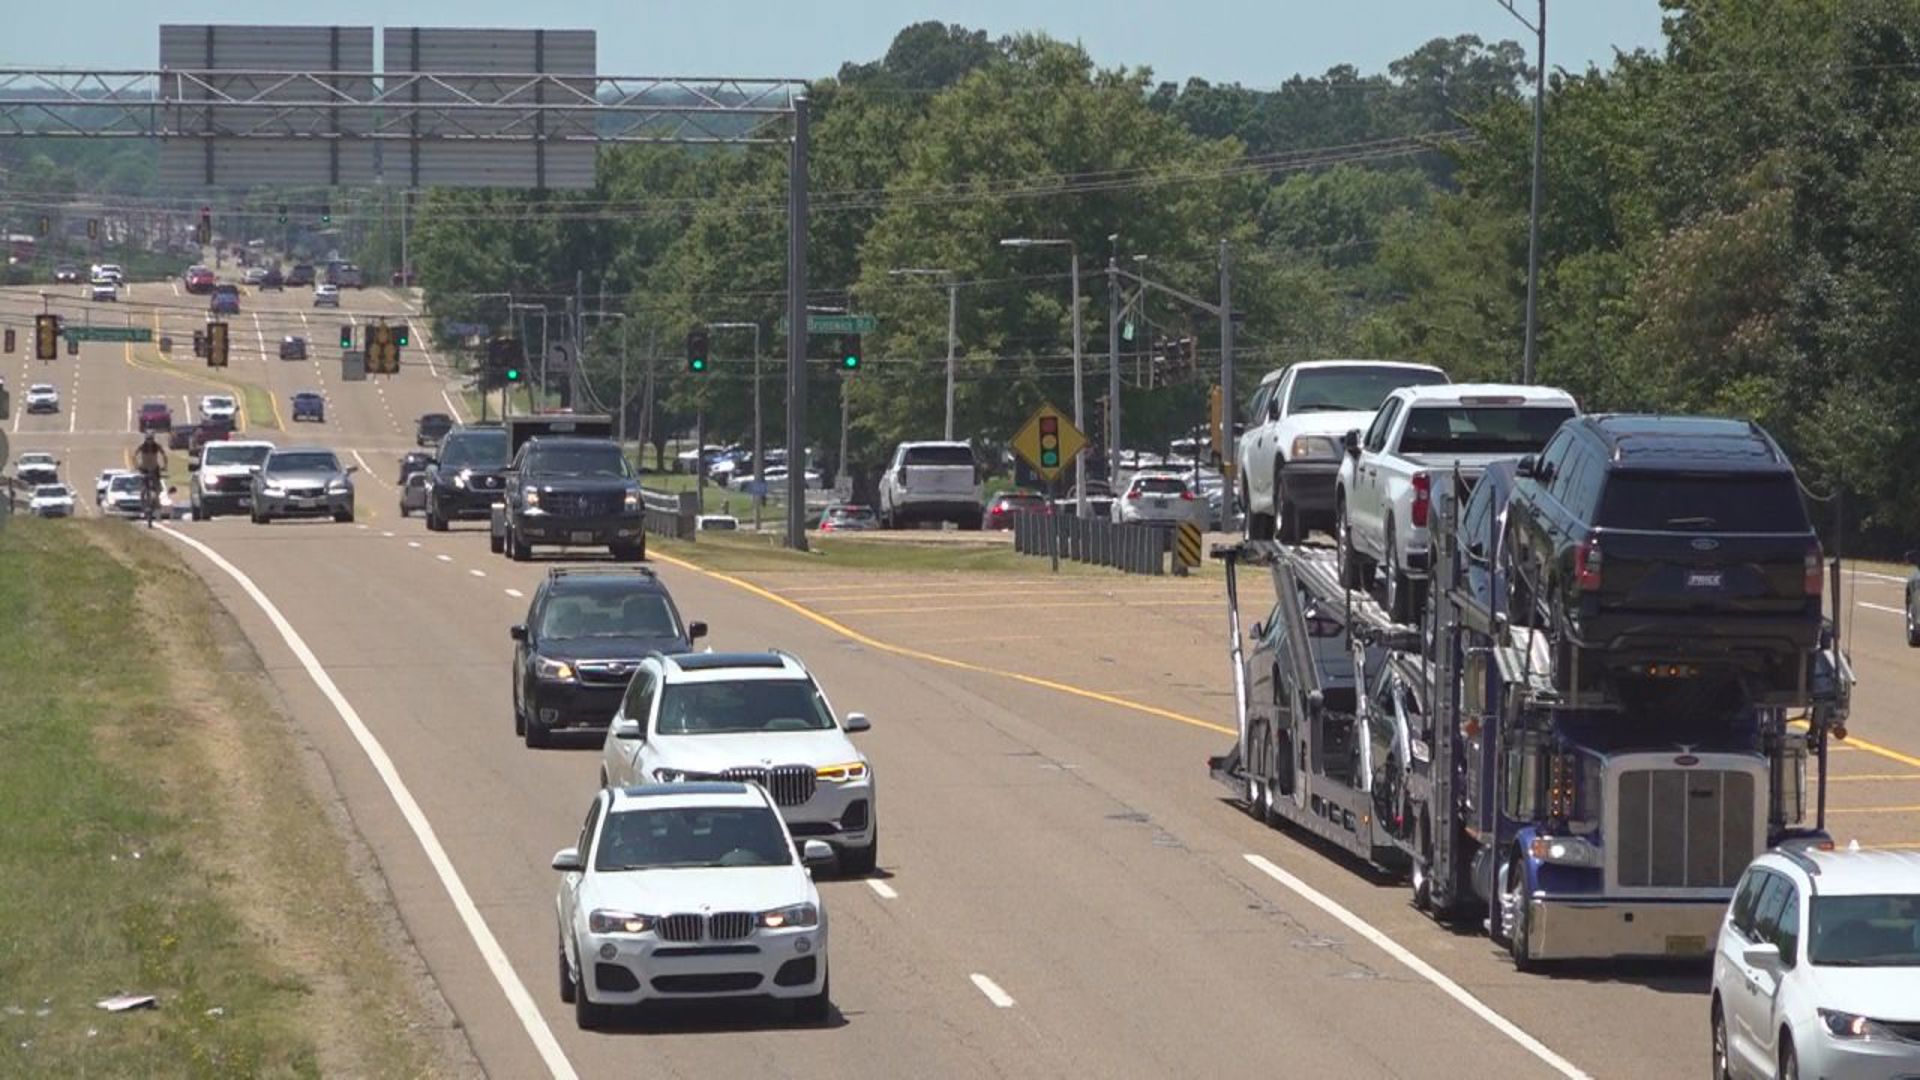 Tennessee law enforcement will be out in force on the Fourth of July weekend to cutdown on accidents and traffic deaths, especially in the Memphis area.